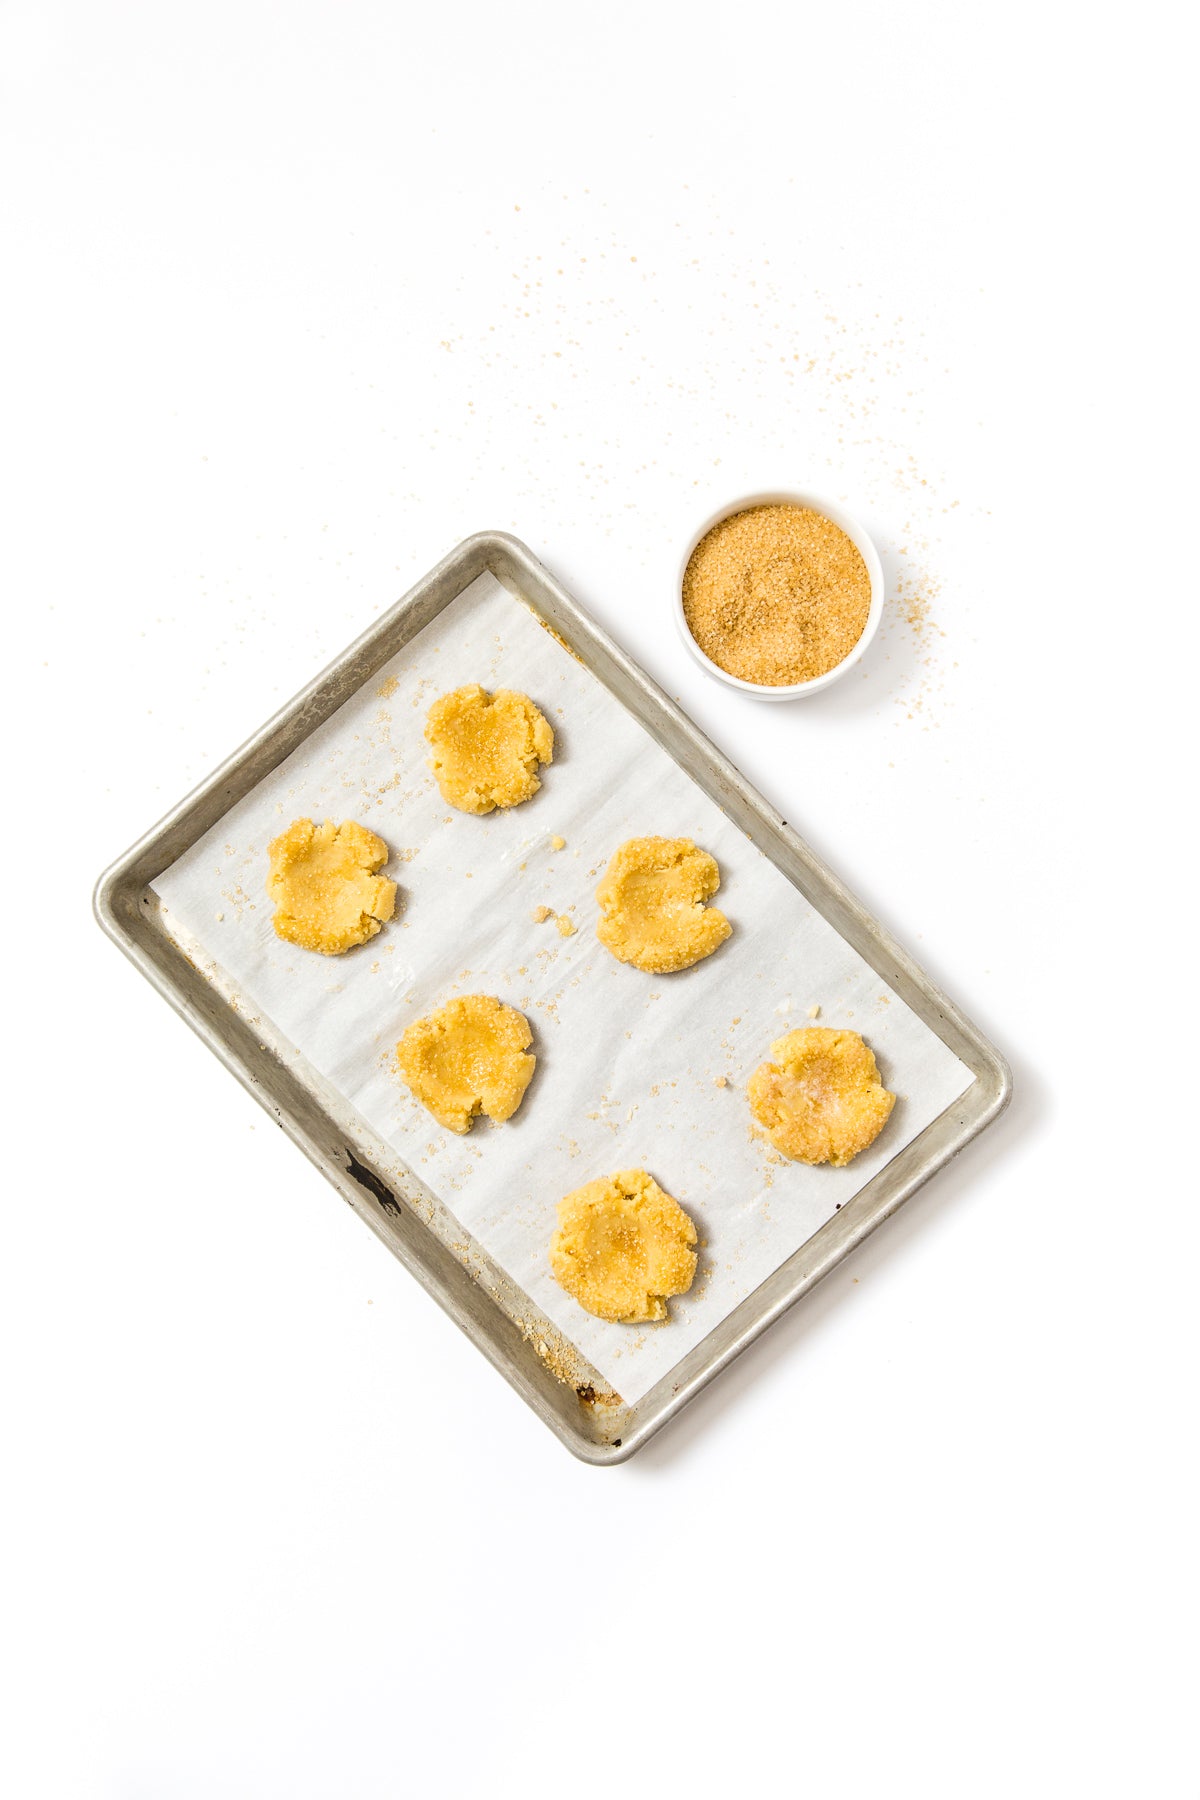 Image from above of a baking sheet with six dough balls for Miss Jones Baking Co Cake Batter Thumbprint Cookies